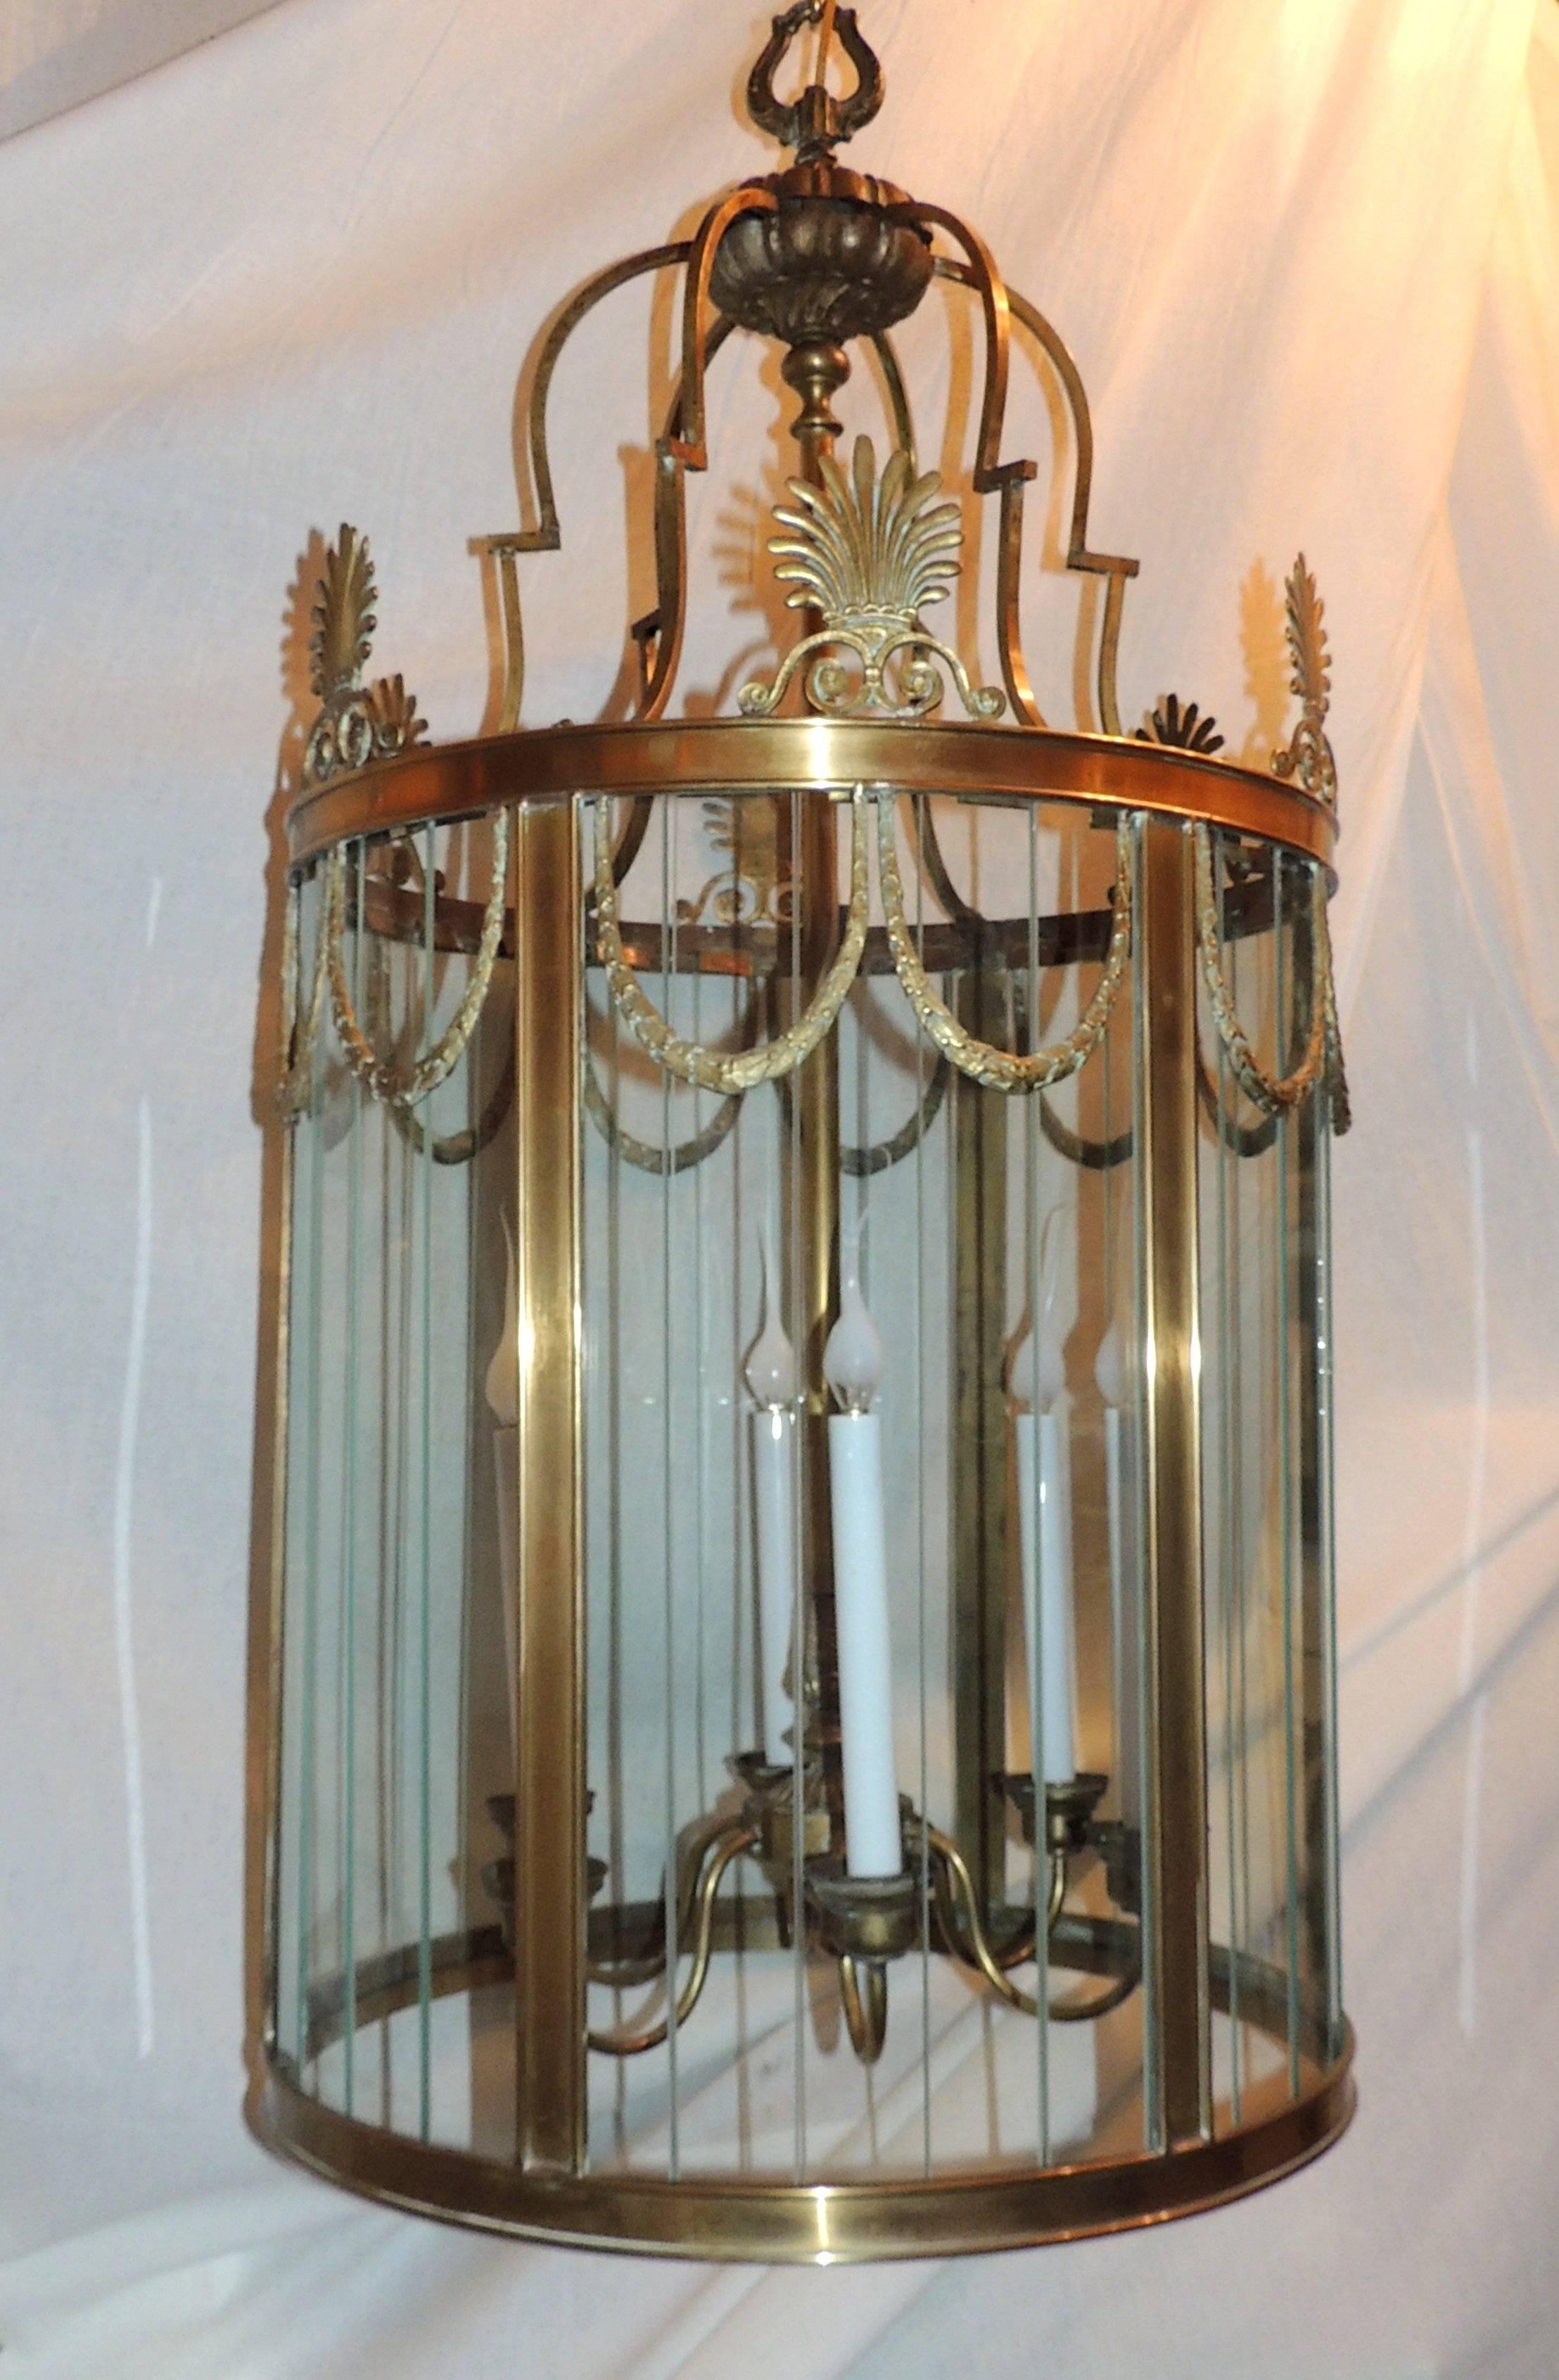 Wonderful large six-light lantern with multiple glass panels that diffuse the light. 
Acanthus leaves adorn the top with draped filigree wrapping around the sides.

Measures: 40" H x 20" W.
    